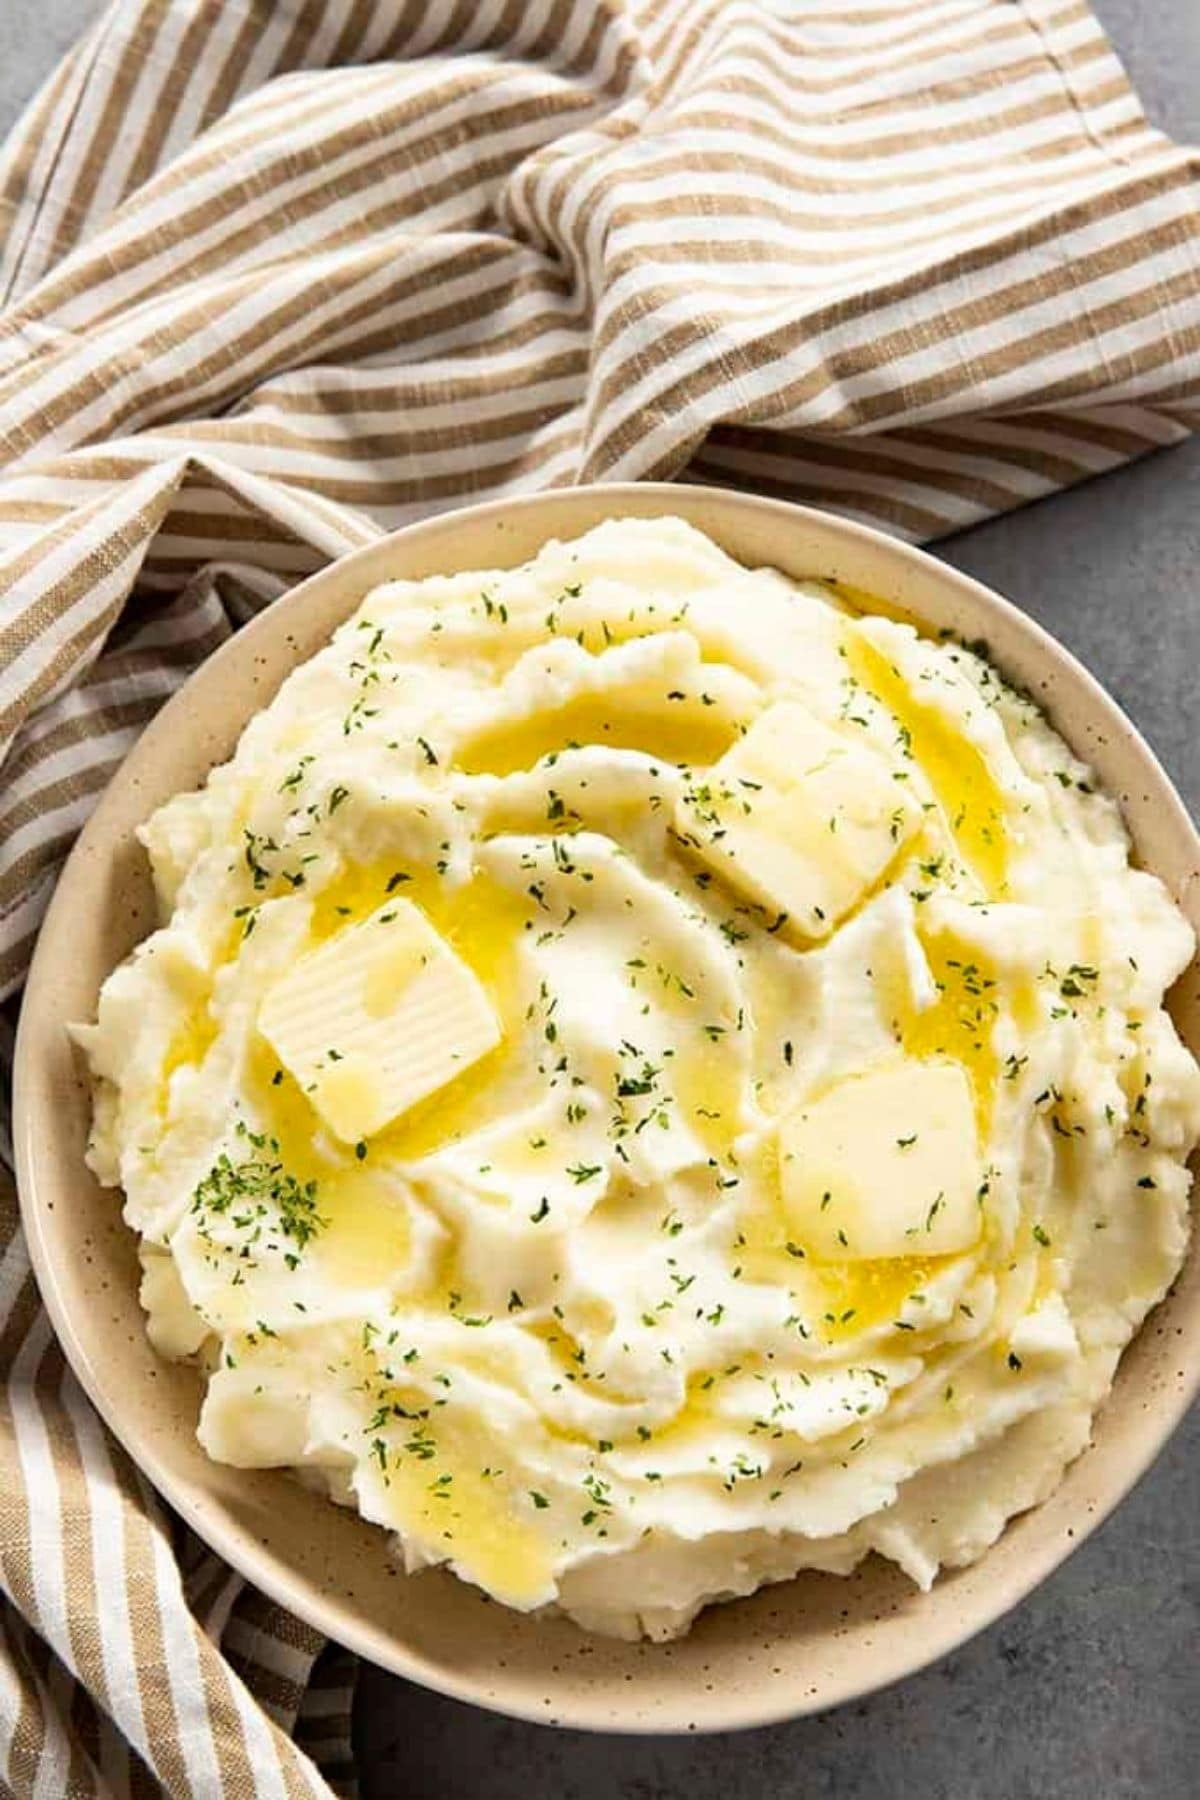 Large brown bowl of mashed potatoes with pats of butter on top